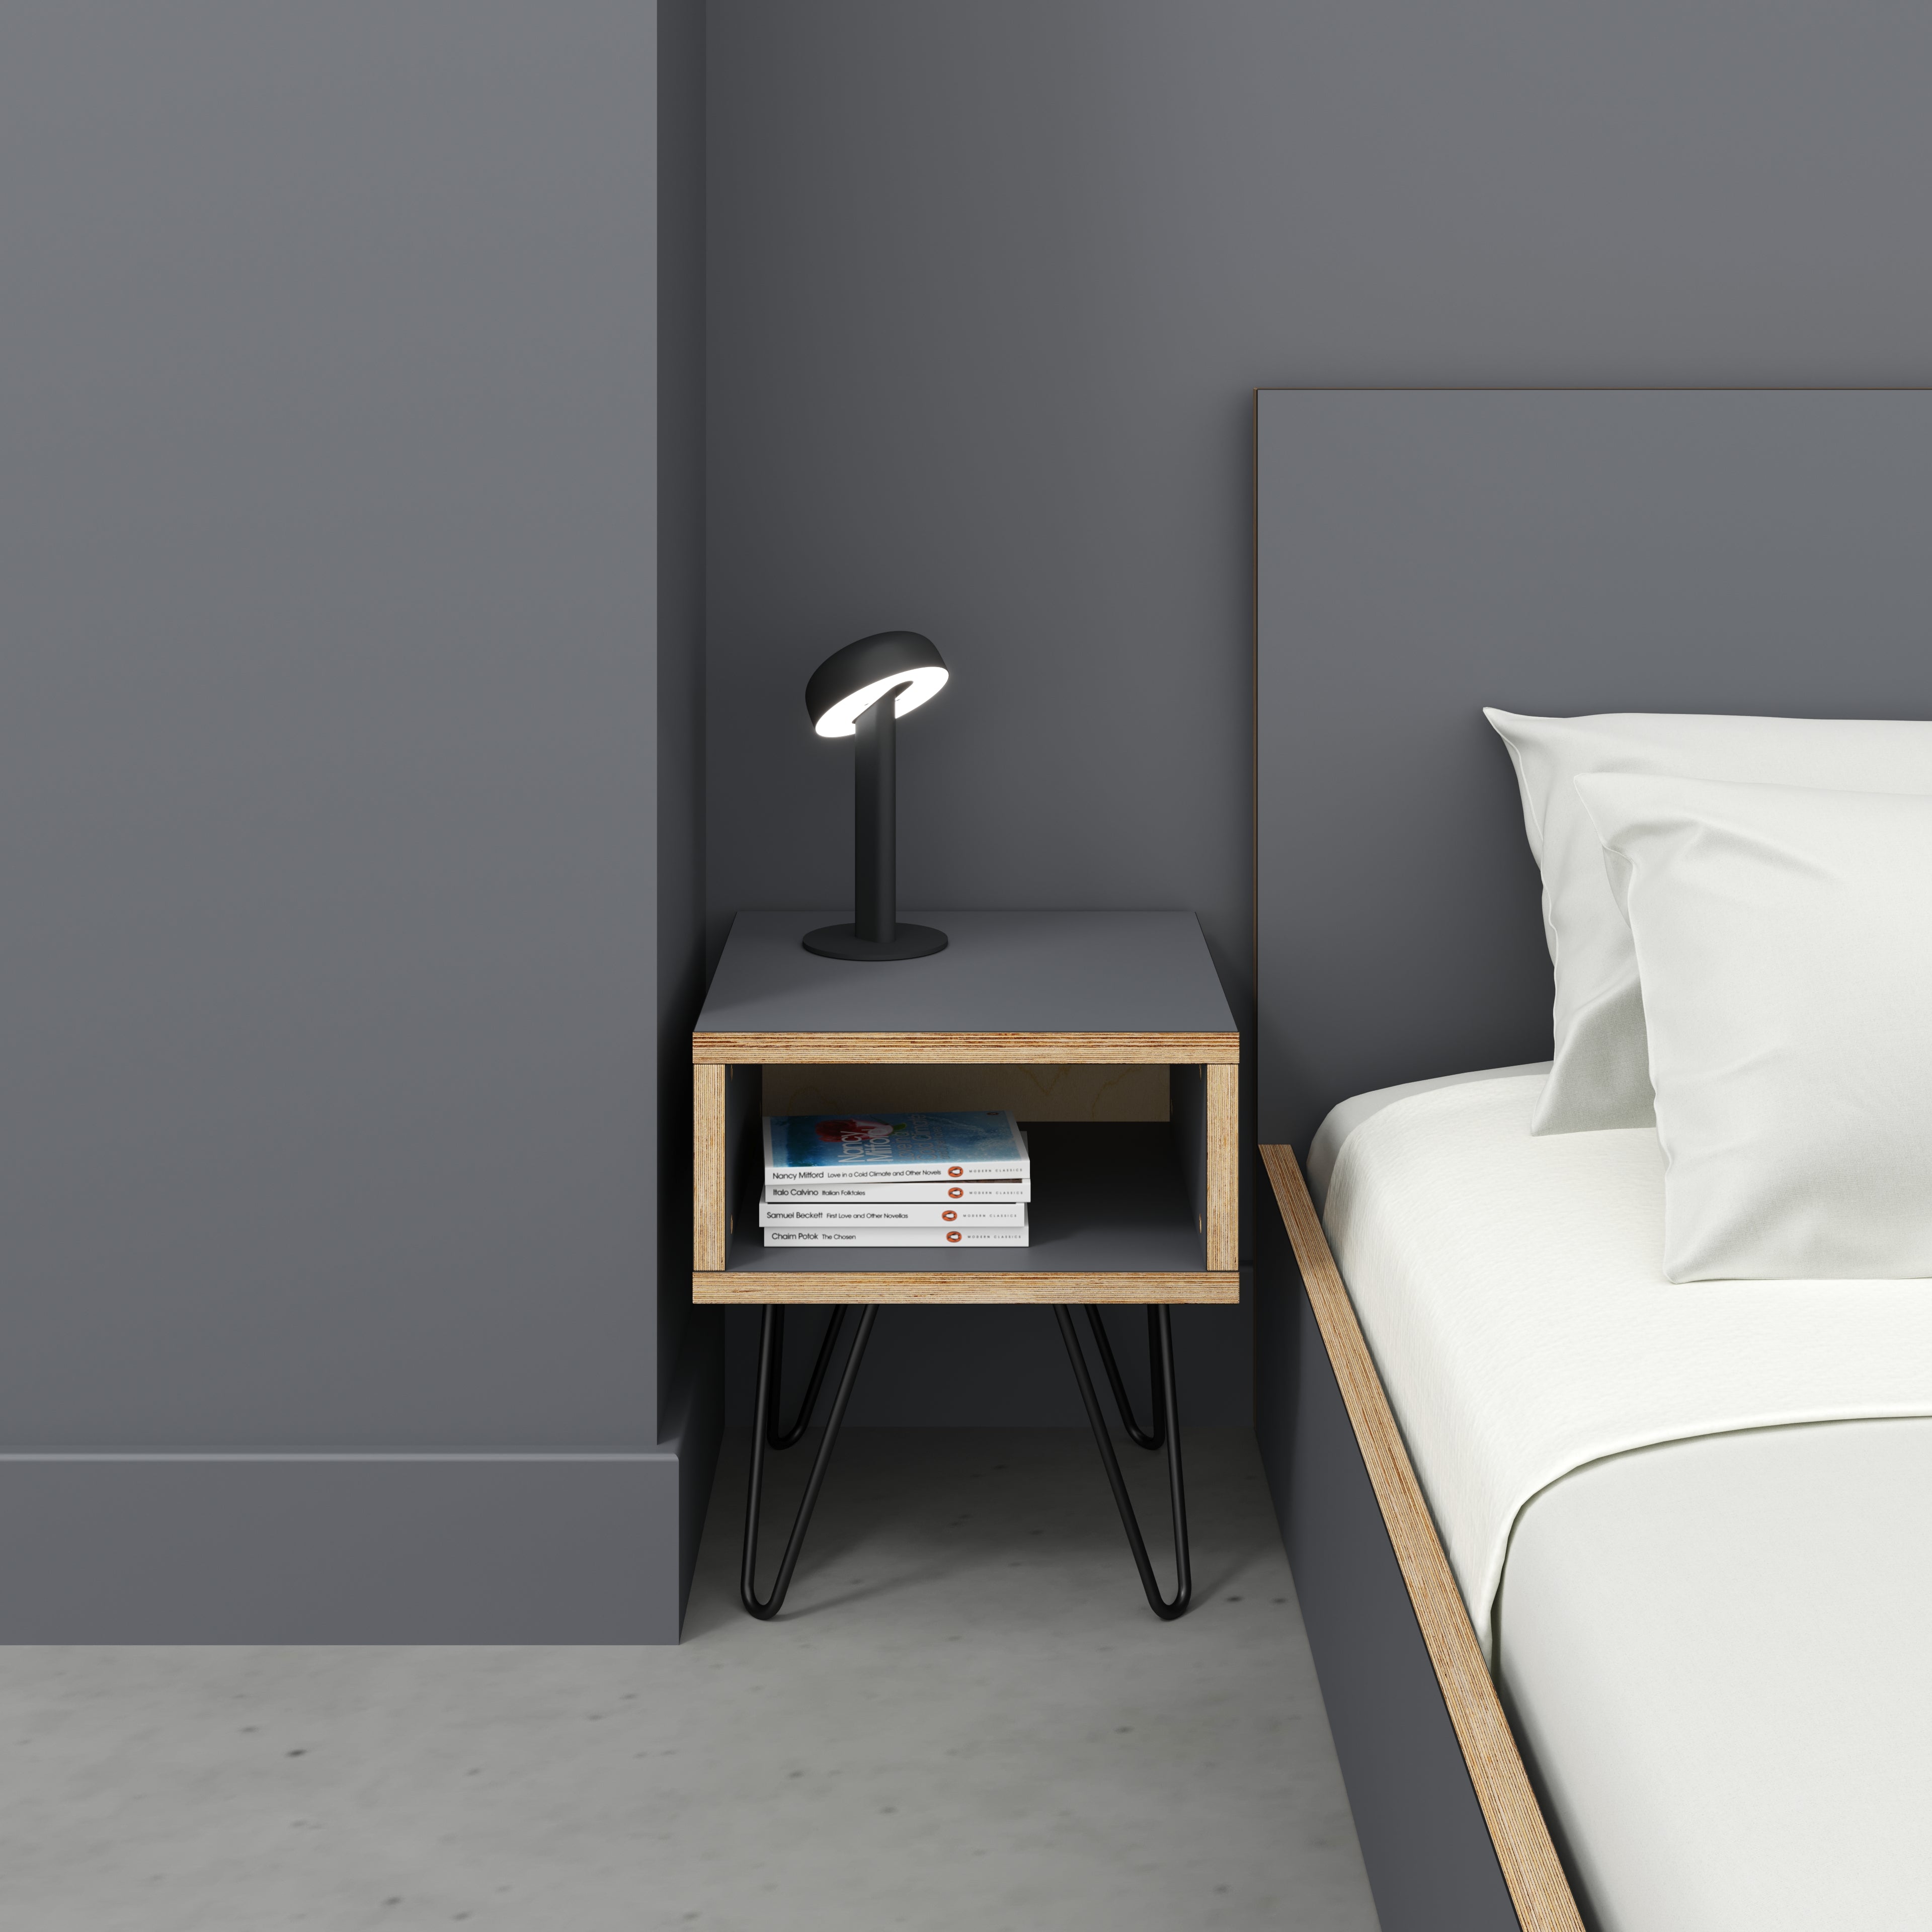 Bedside Table with Box Storage and Black Hairpin Legs - Formica Tornado Grey - 400(w) x 400(d) x 450(h)